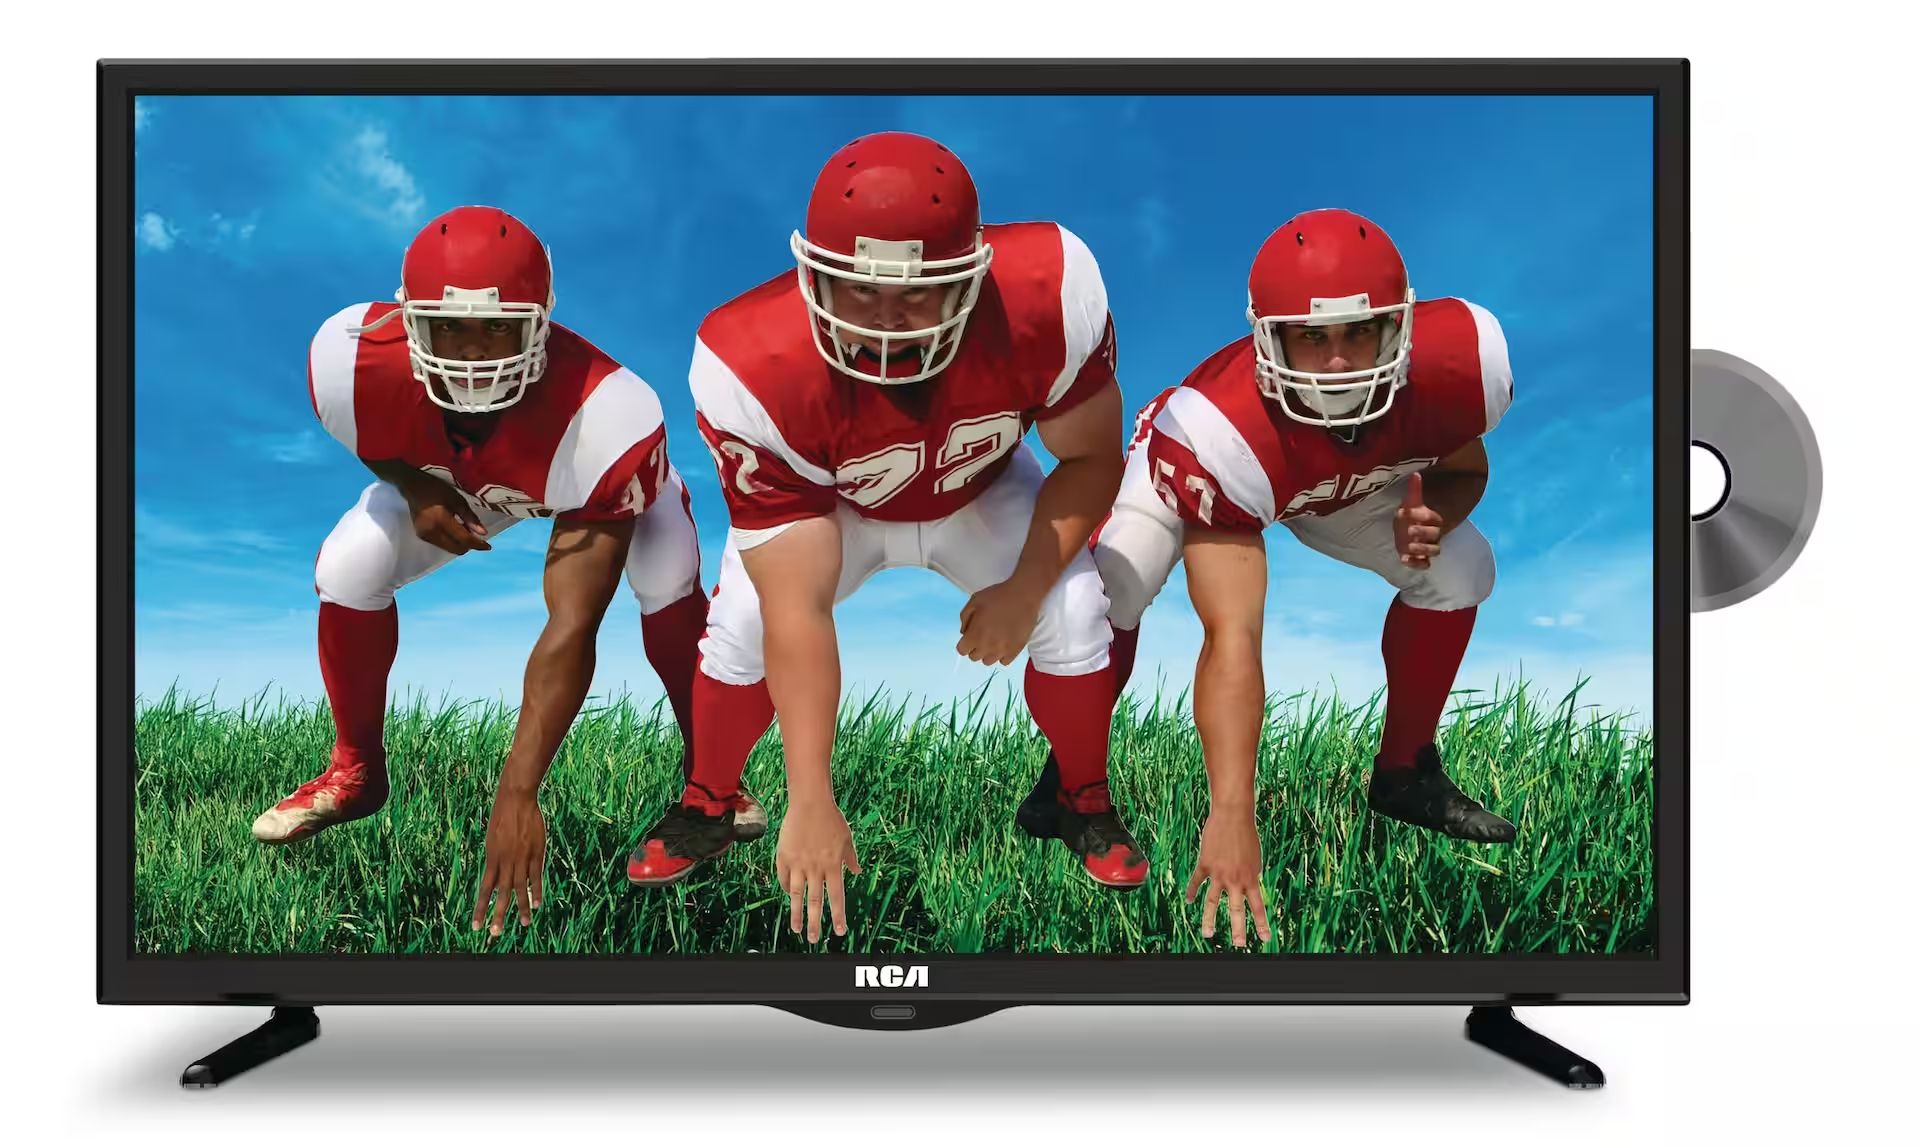 How To Turn On RCA 24 LCD LED TV